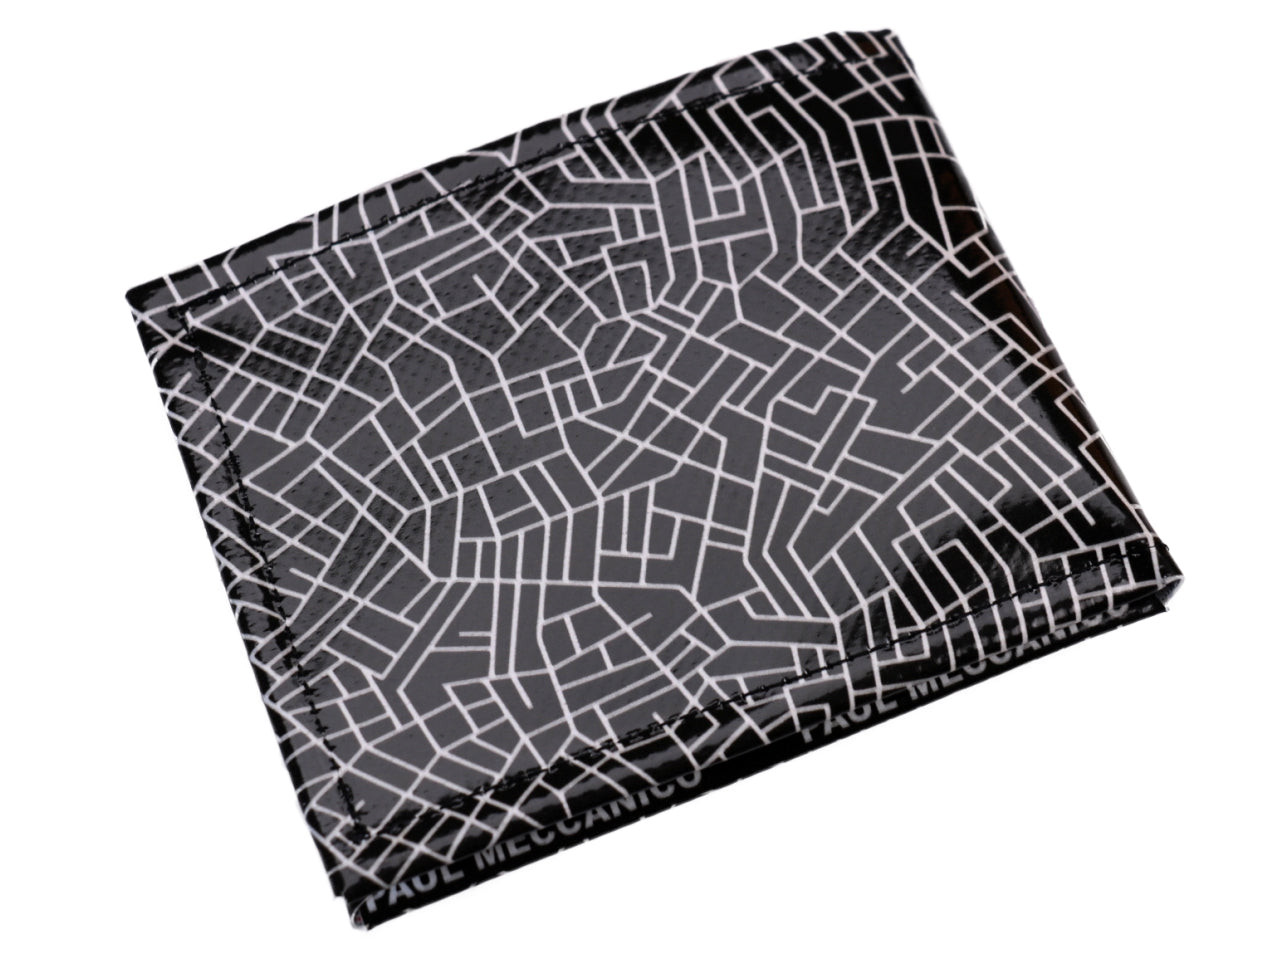 MEN'S WALLET BLACK AND WHITE LABYRINTH FANTASY. MODEL CRIK MADE OF LORRY TARPAULIN. - Limited Edition Paul Meccanico